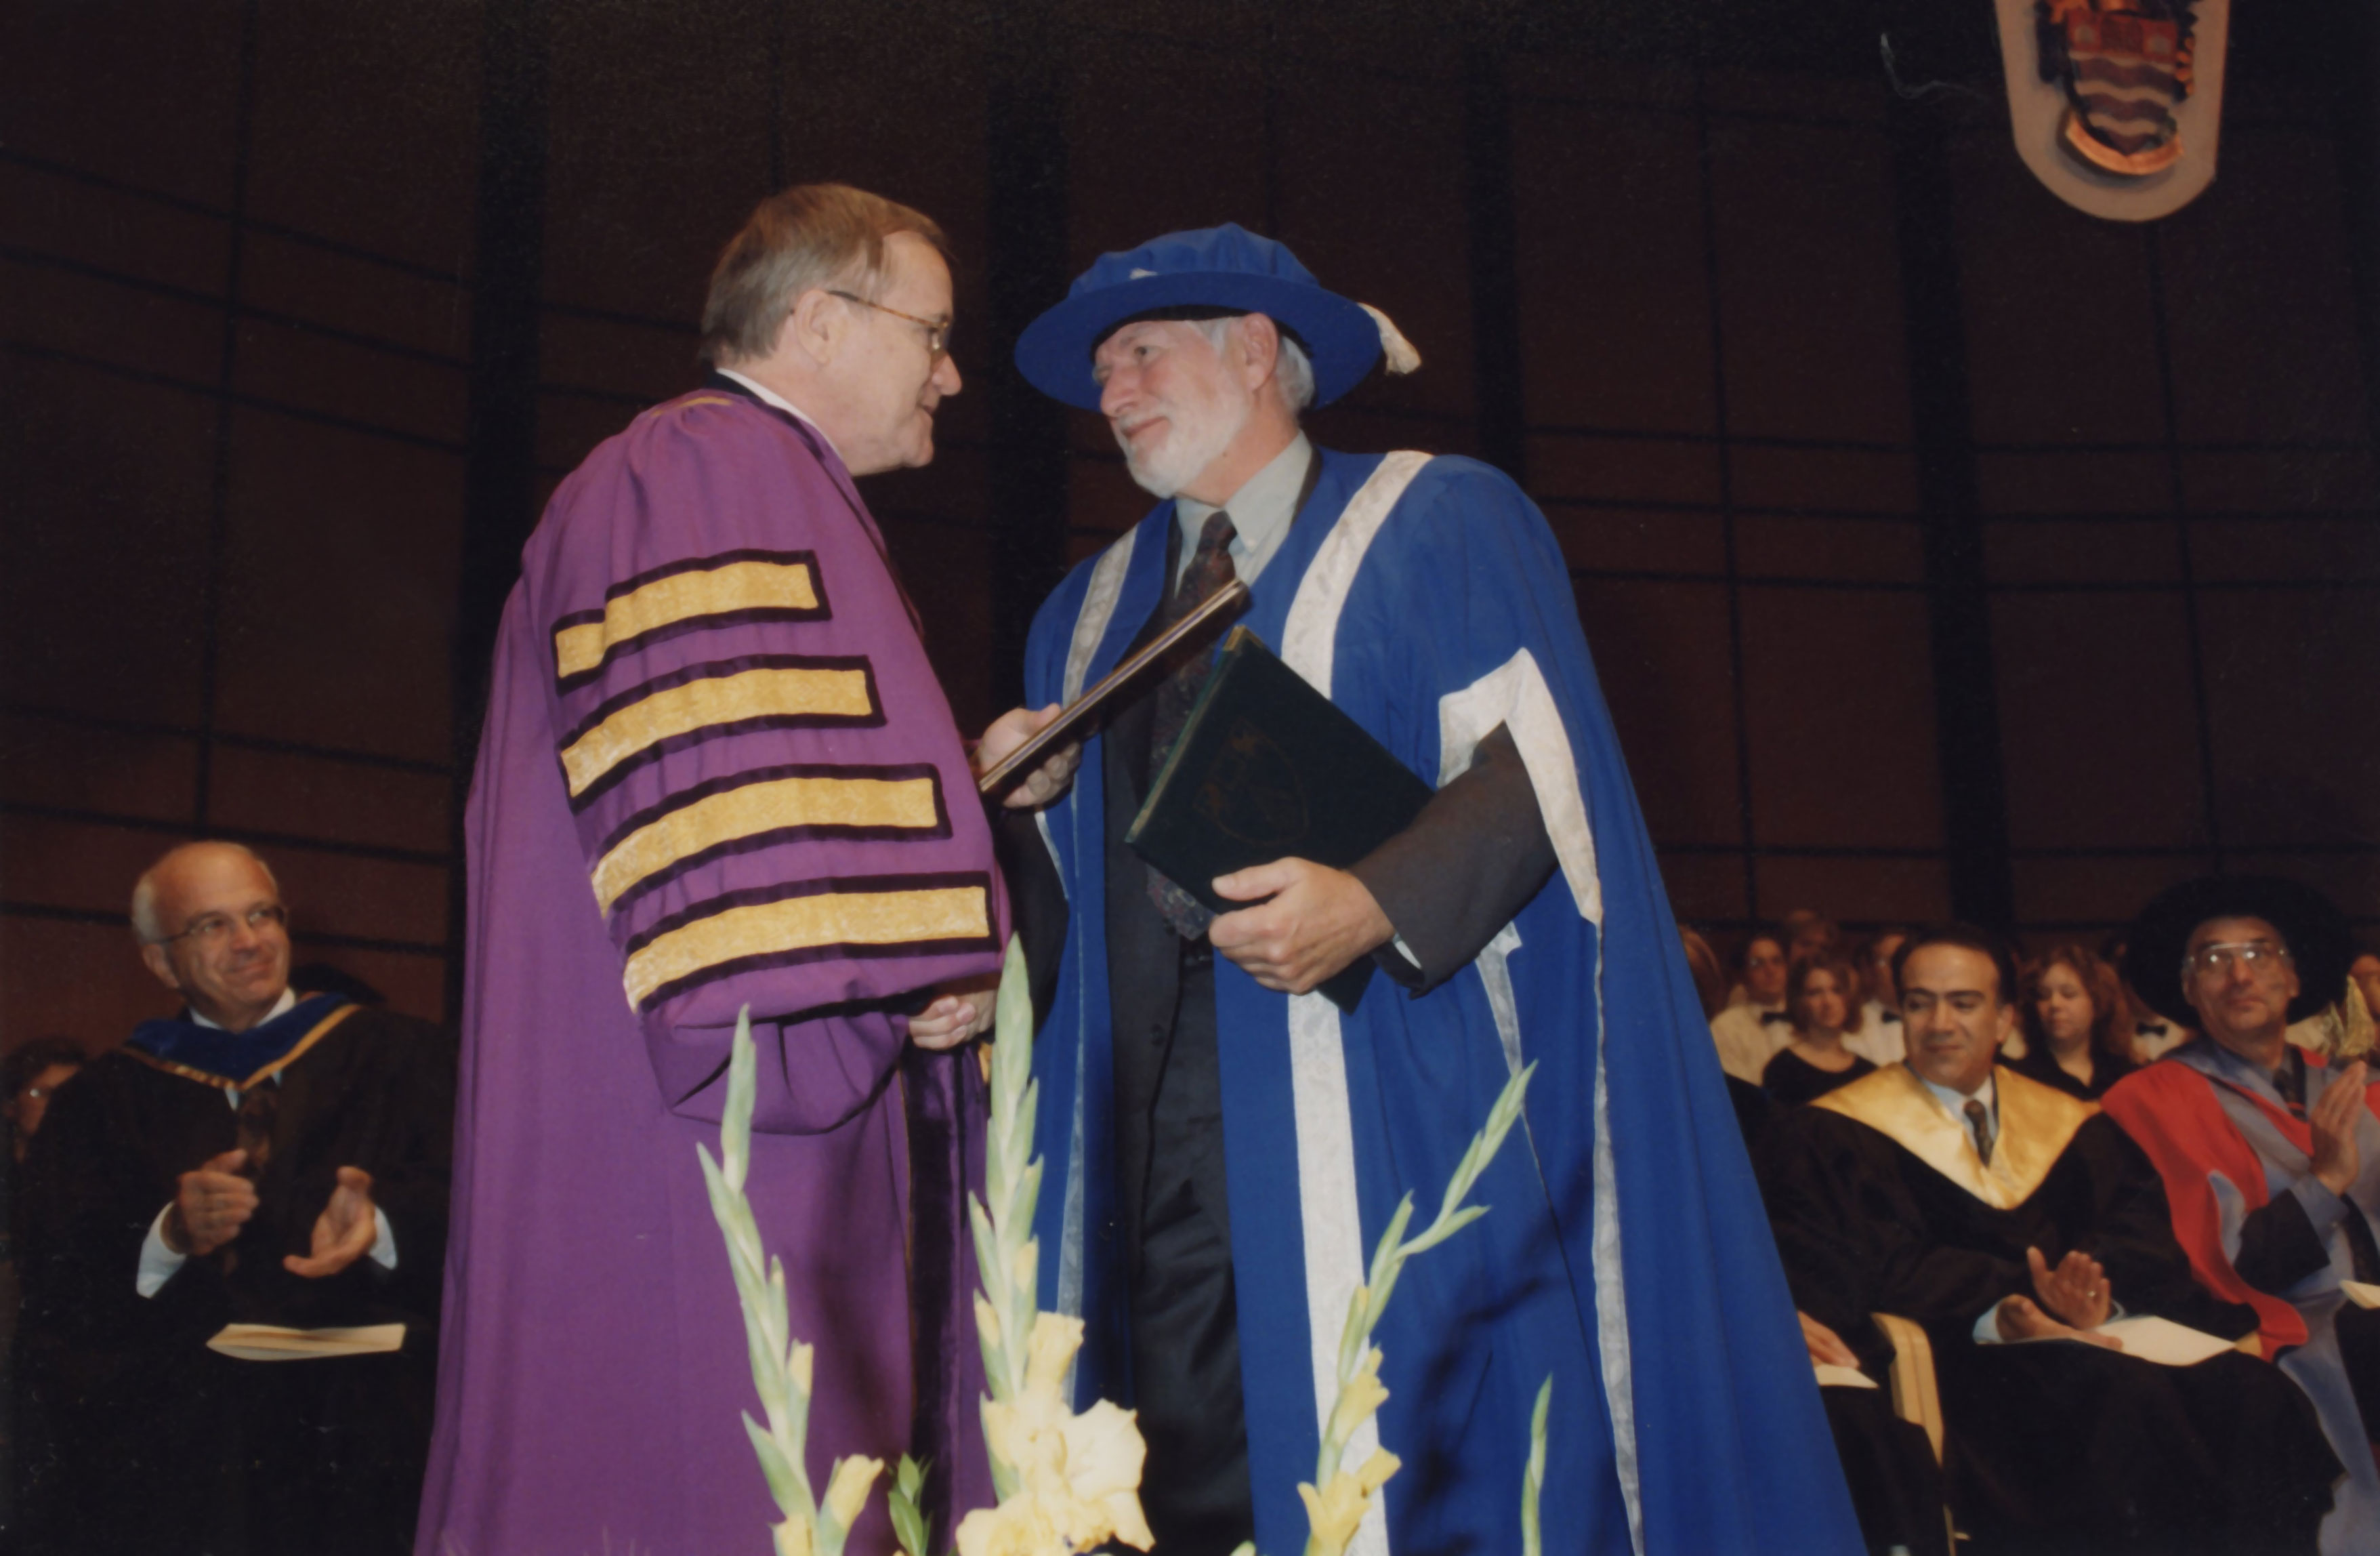 Dr. Fred Gilbert in ceremonial robes during 1998 installation ceremony as Lakehead University president